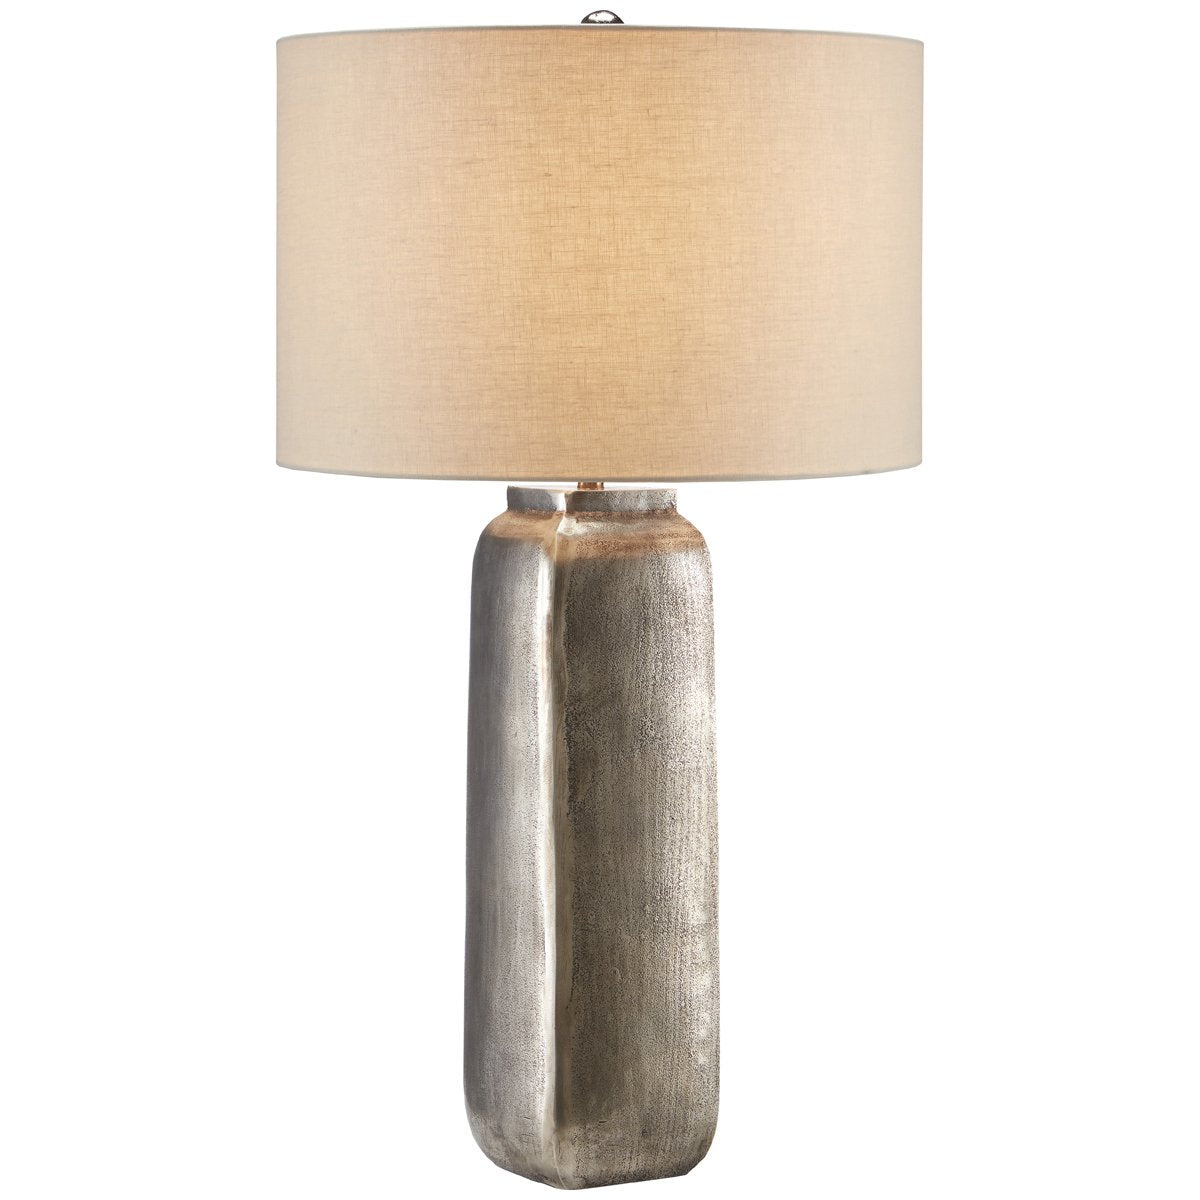 Currey and Company Morse Table Lamp